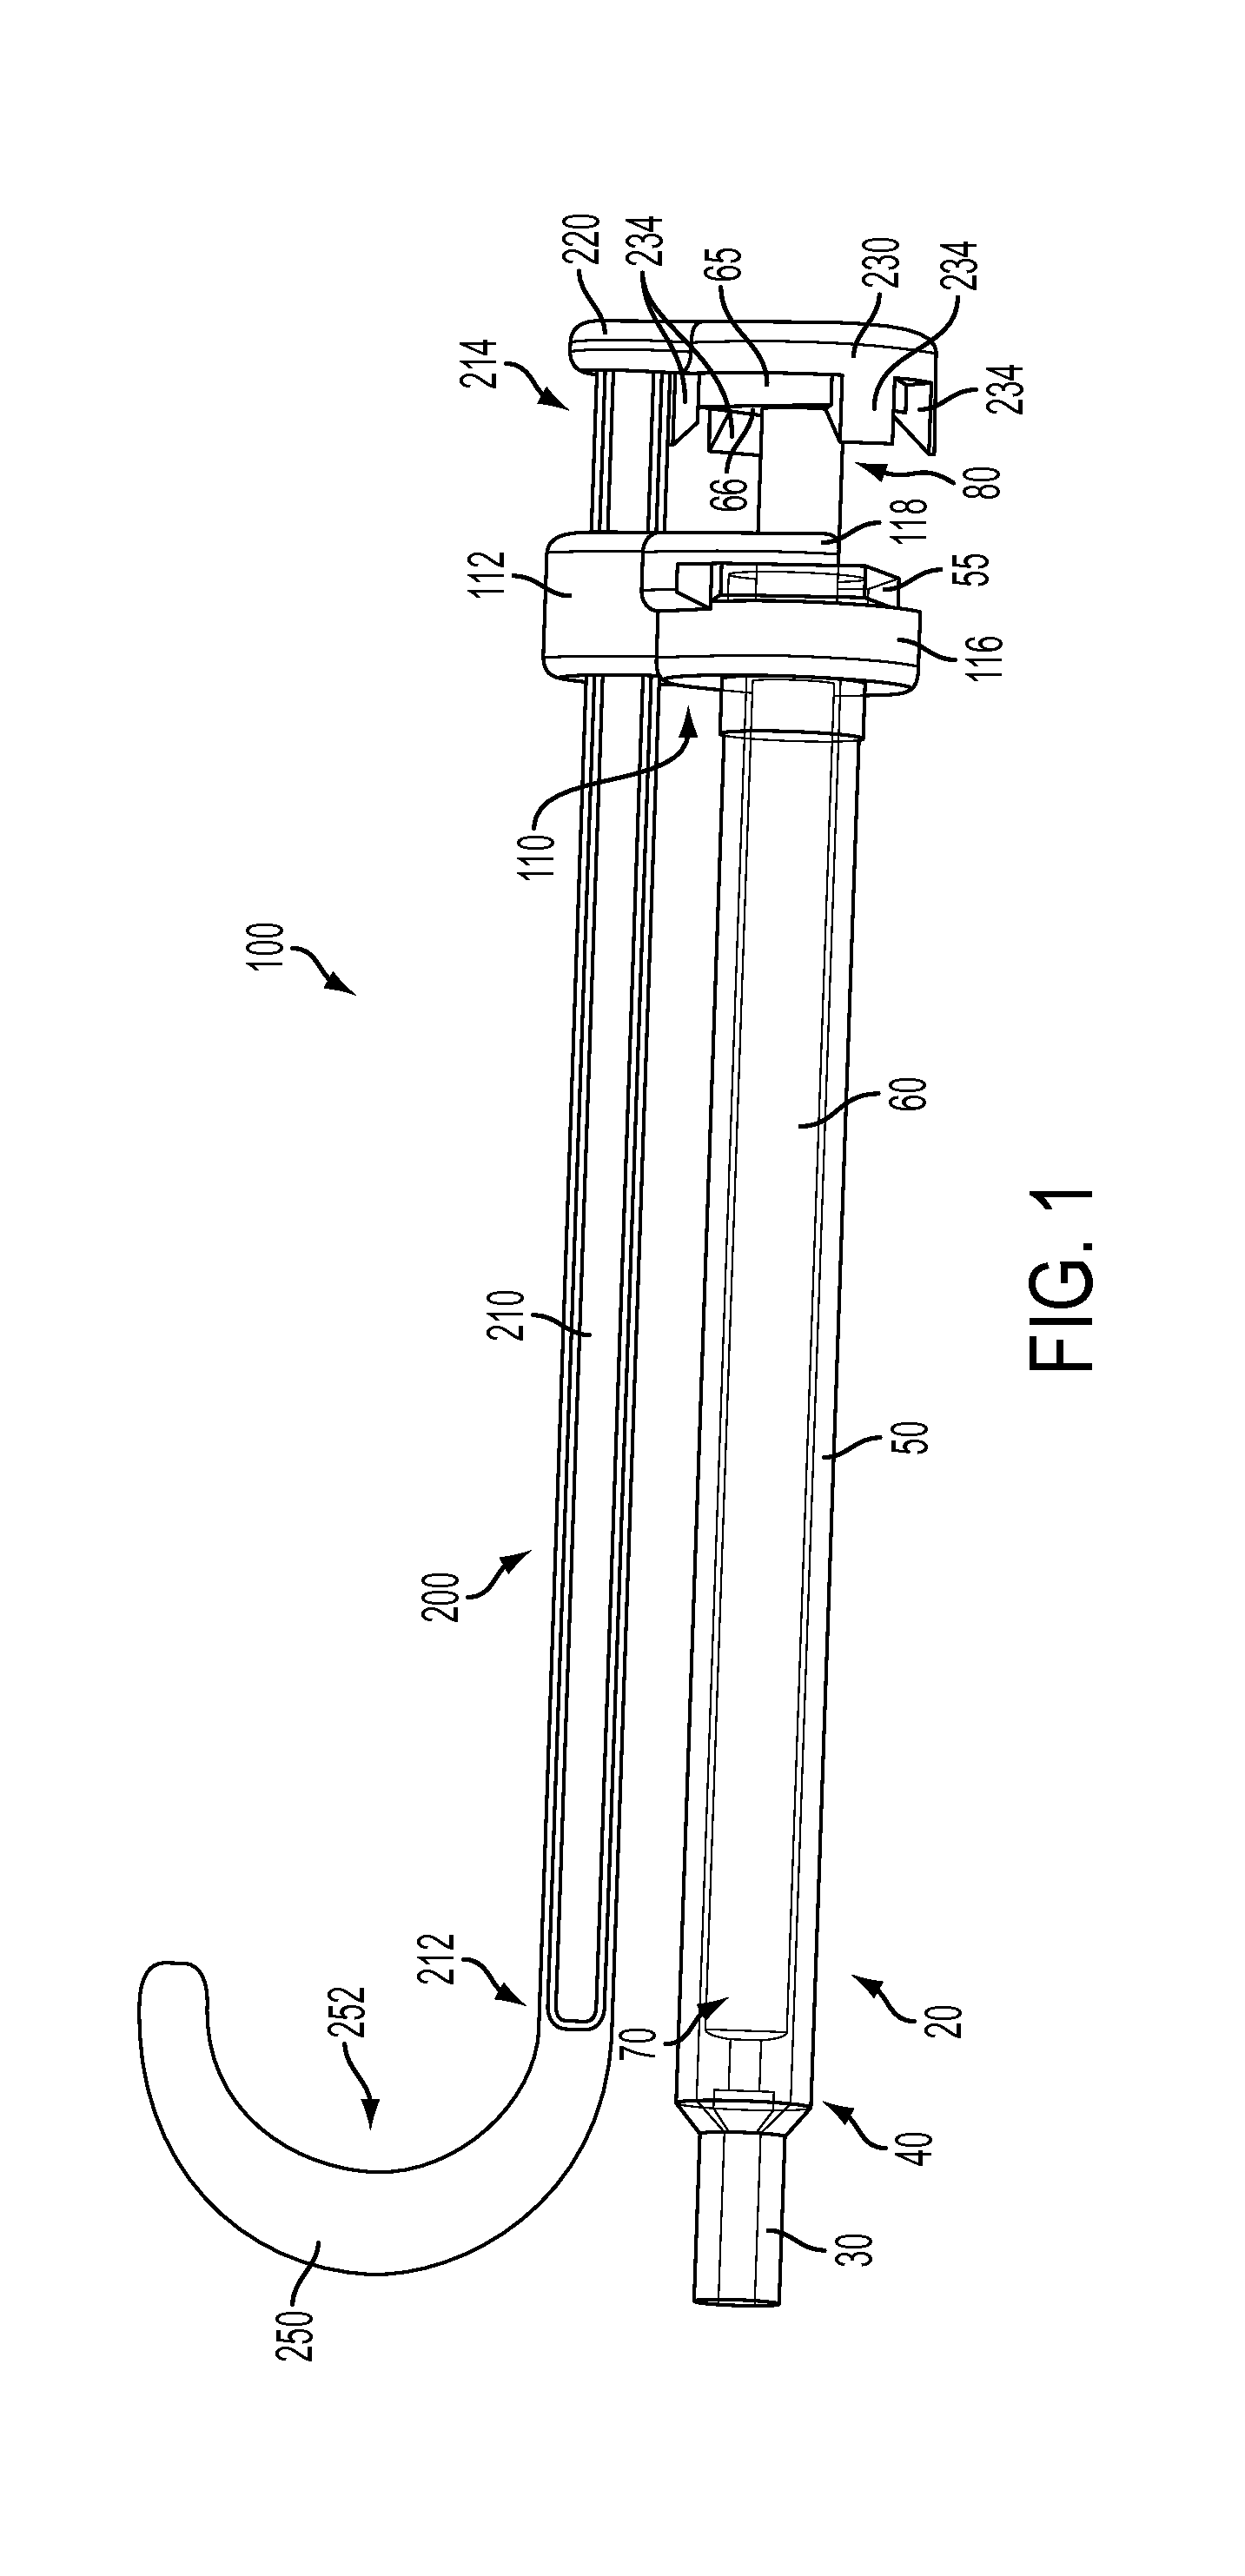 Plunger control device for a syringe and associated method